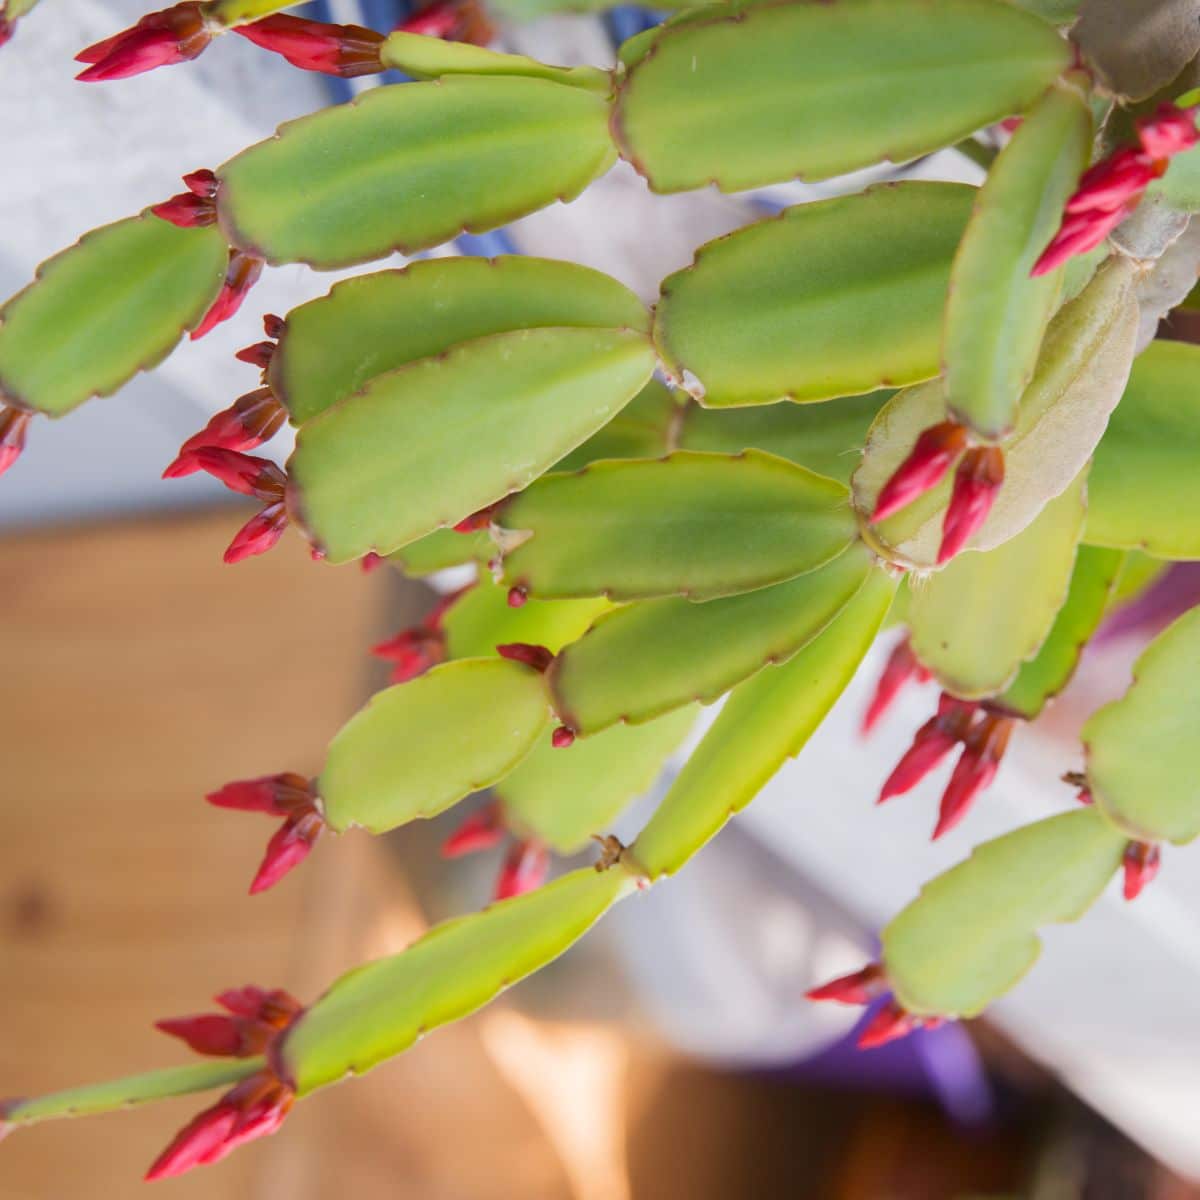 New tiny buds on the branches of a Christmas cactus plant.